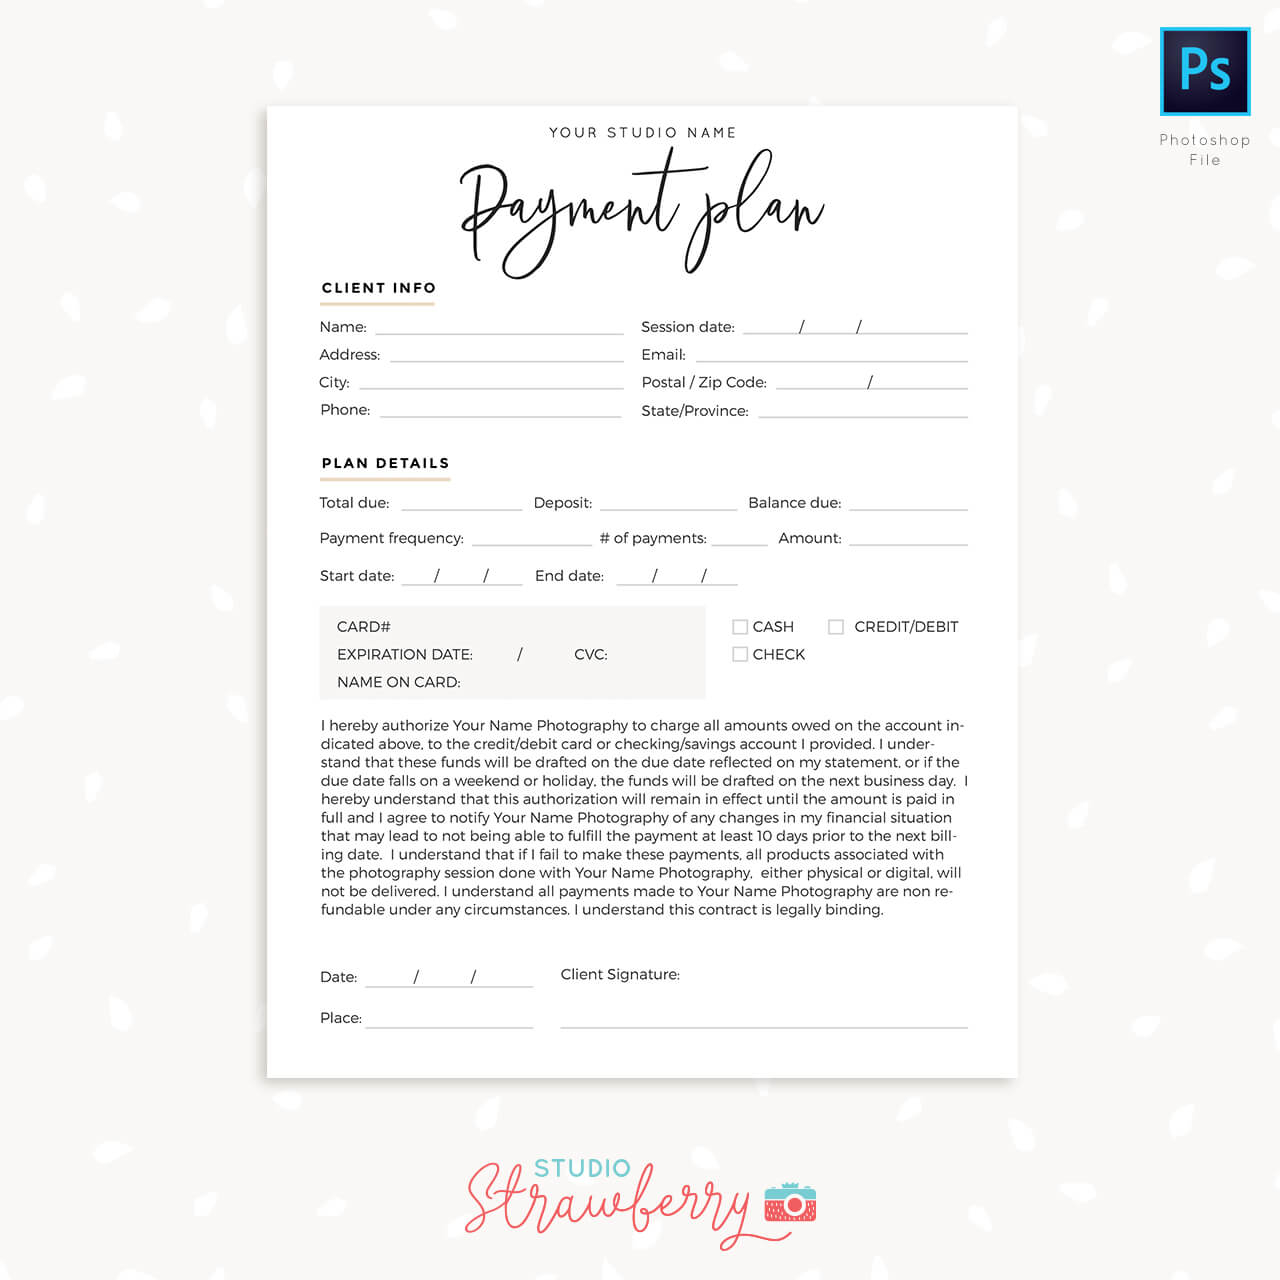 Payment Plan Form For Photographers Strawberry Kit